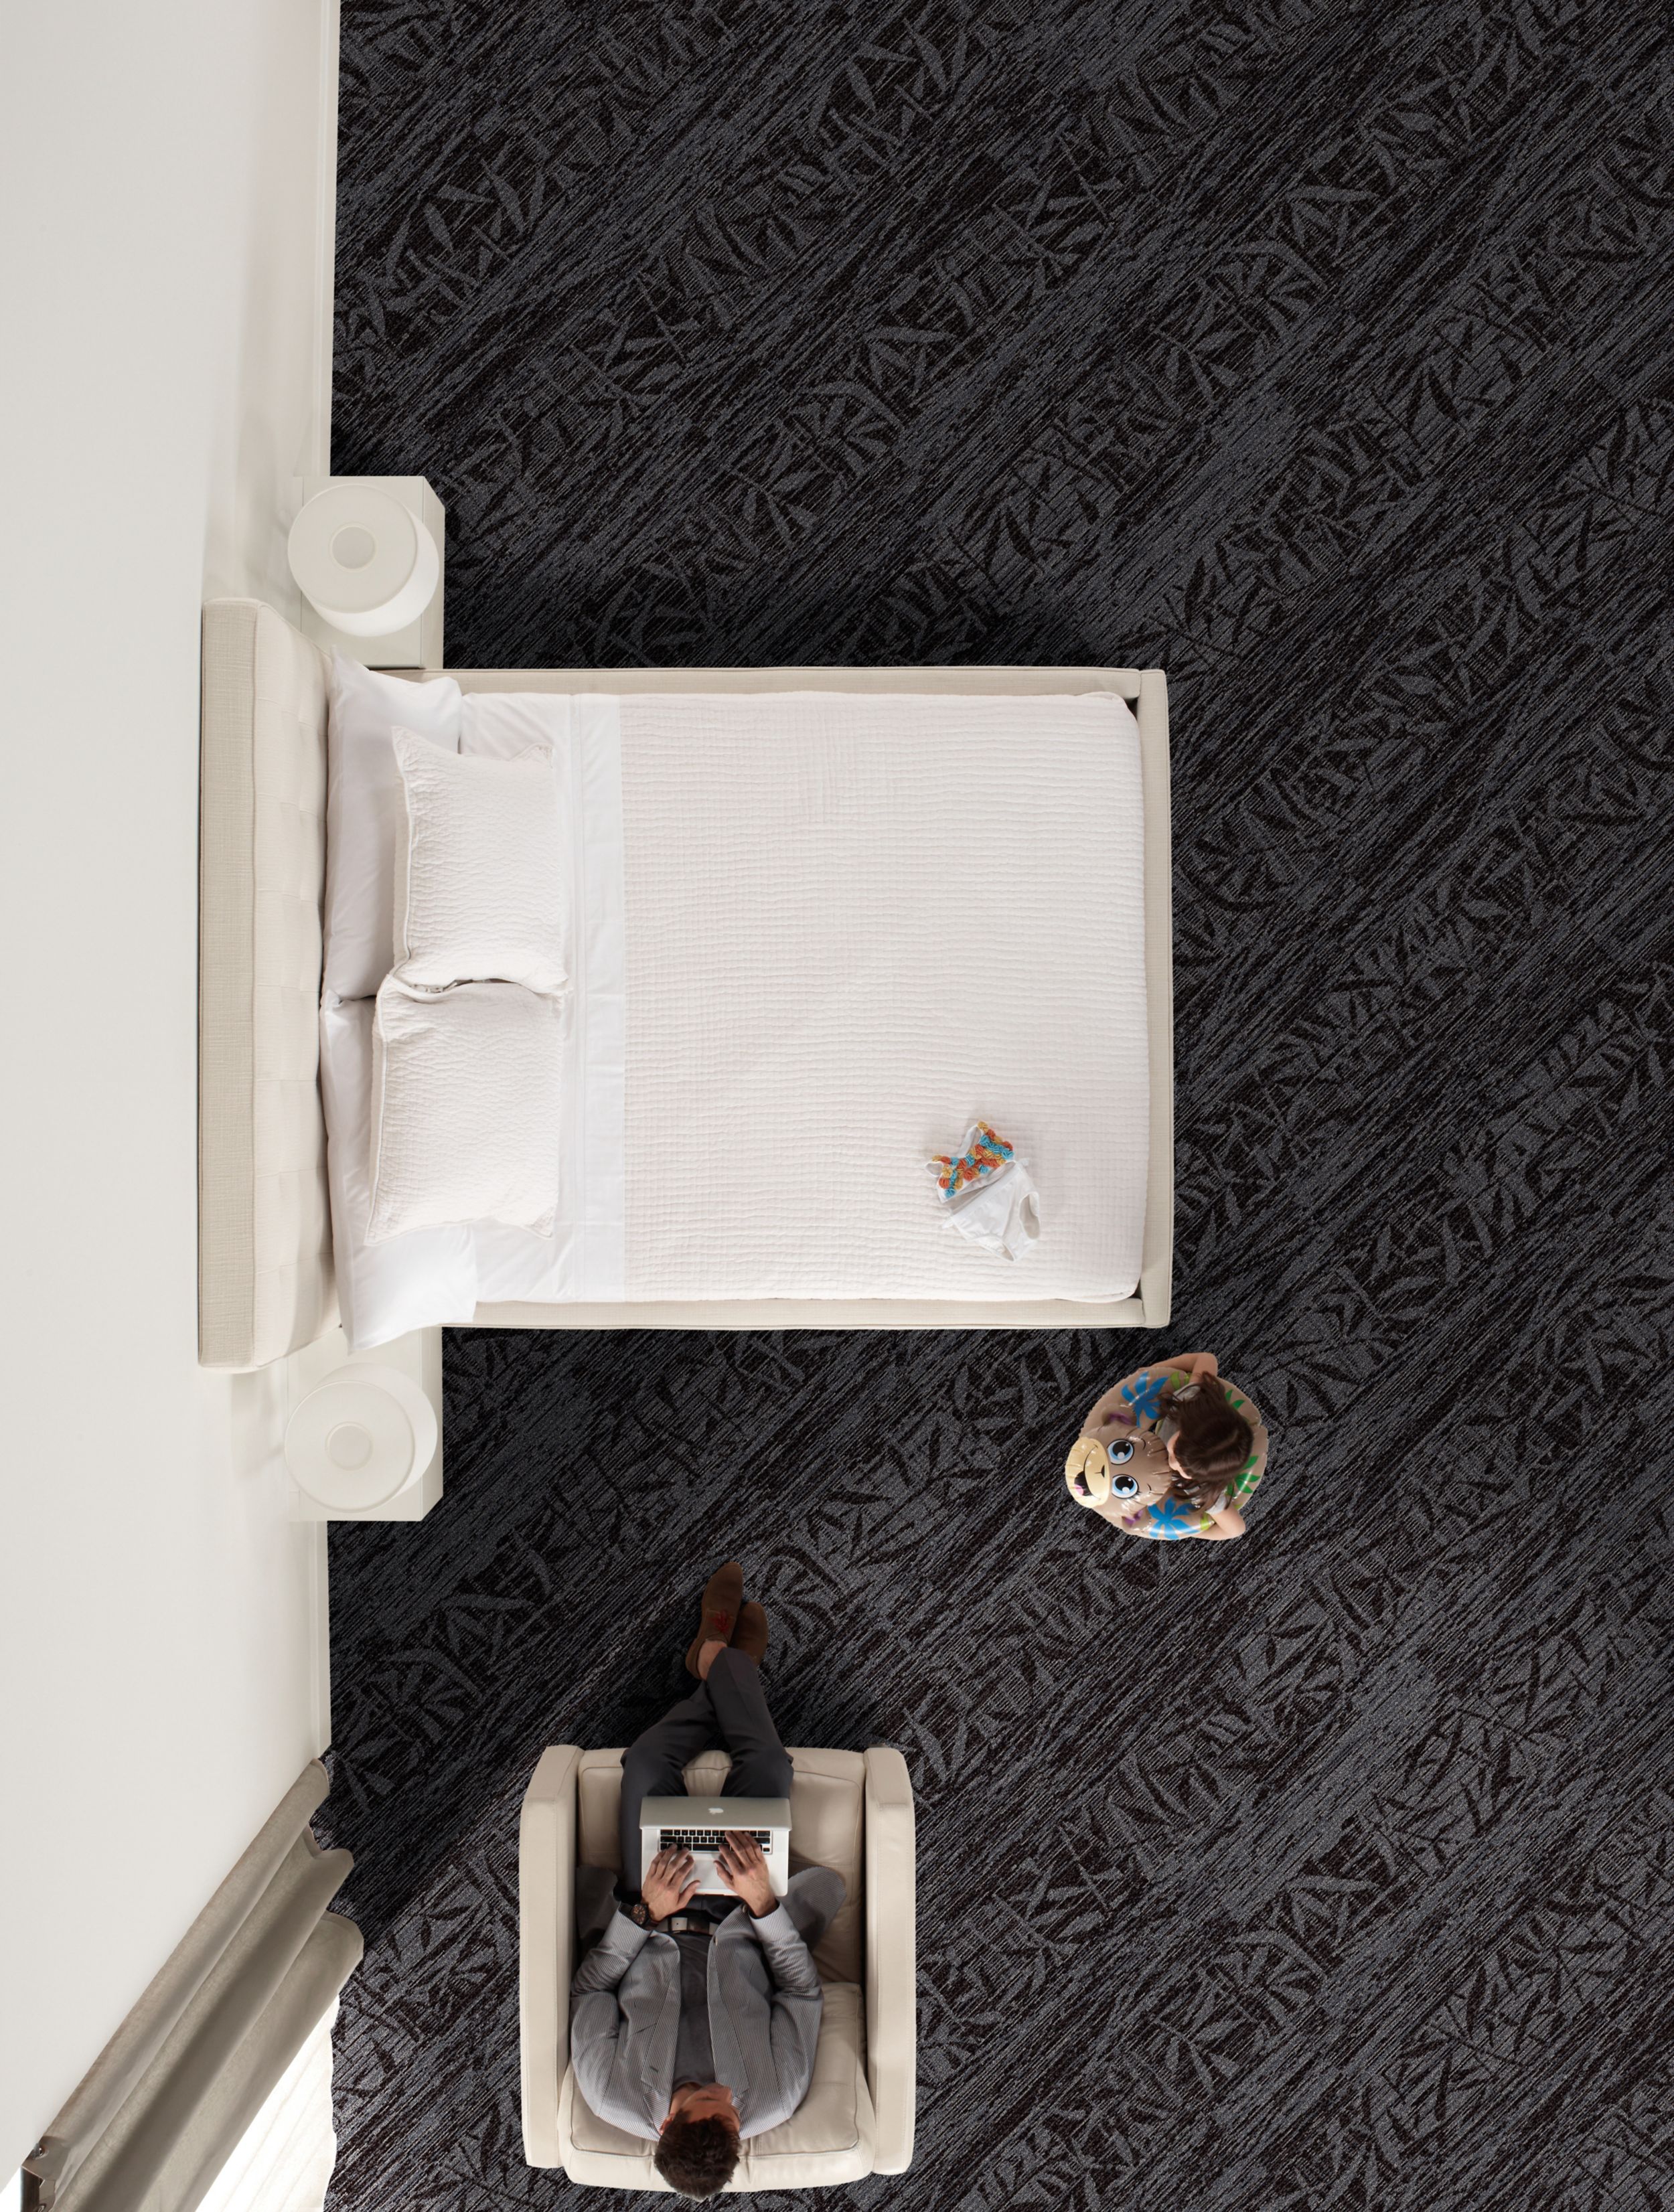 Interface RMS 507 and RMS 508 plank carpet tile in hotel guest room with woman on computer and girl holding stuffed animal numéro d’image 4